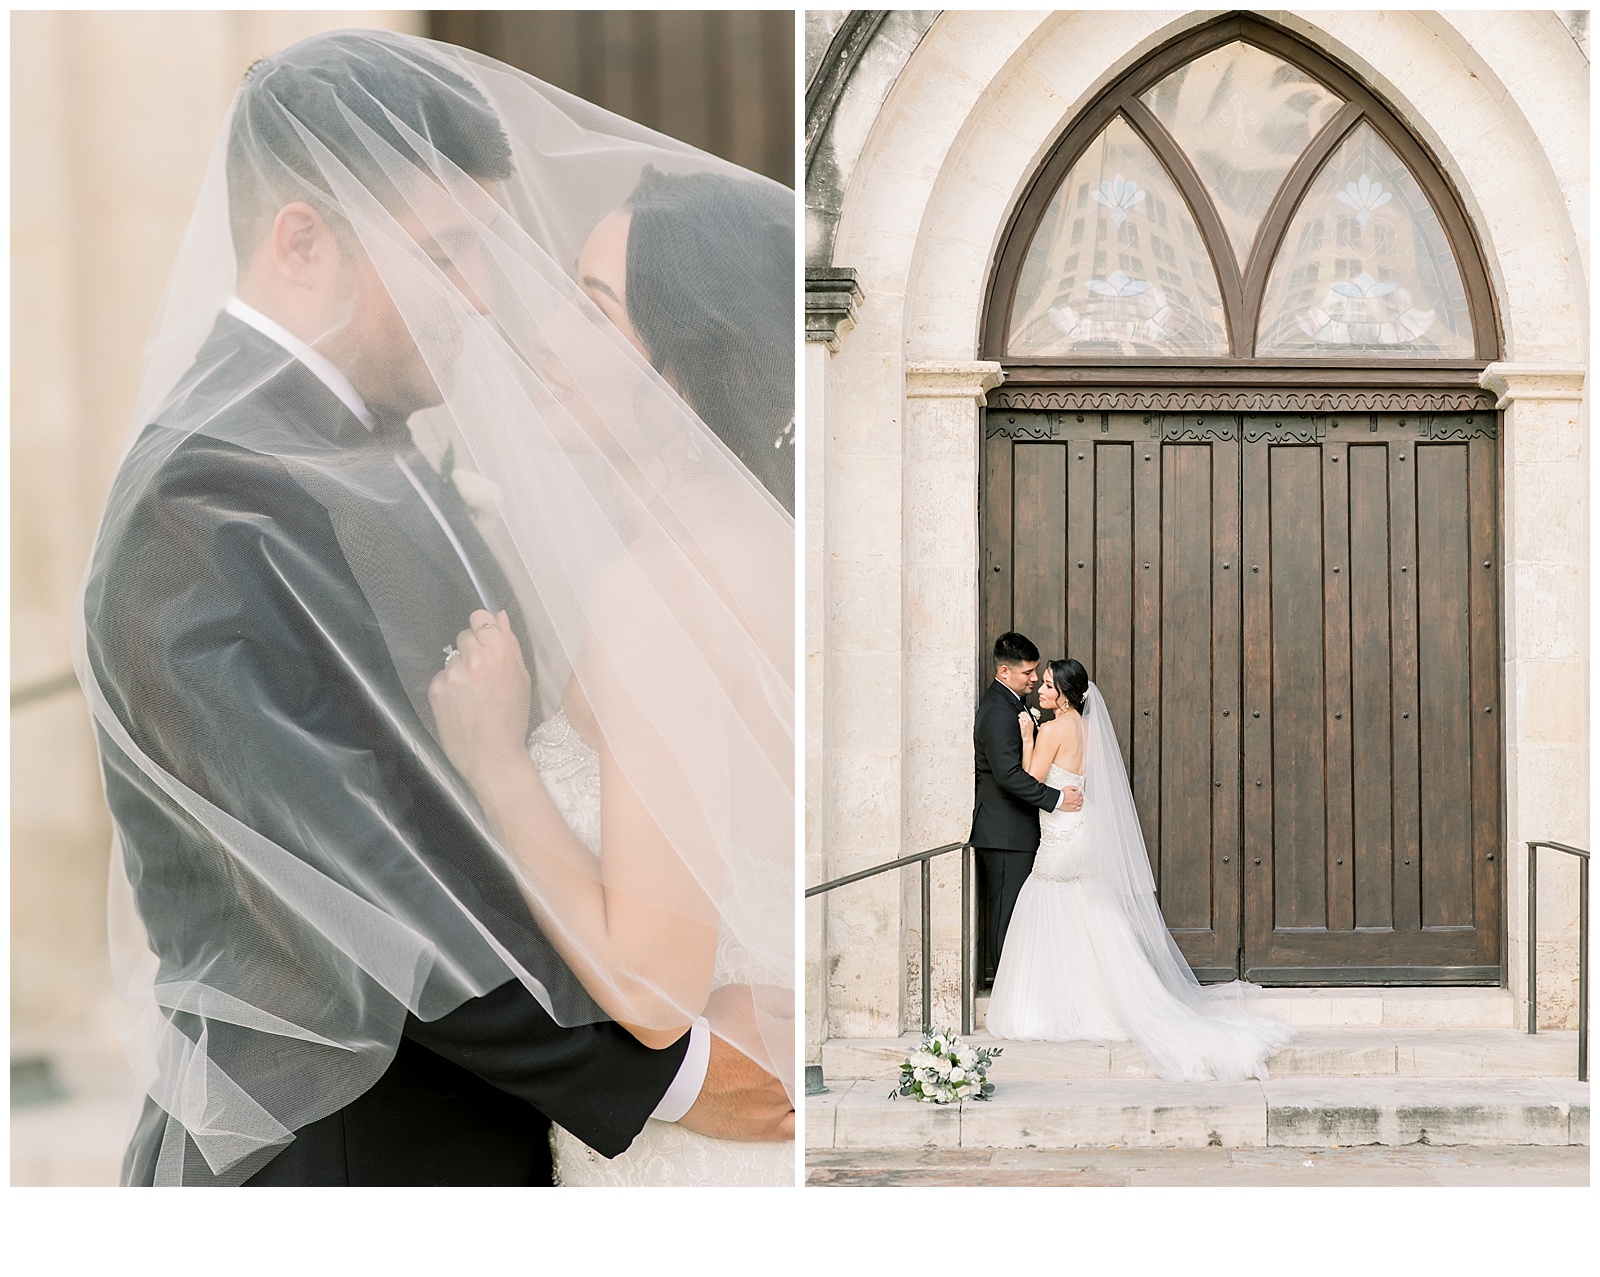 Classic and elegant portraits of bride and groom for A San Fernando Cathedral Wedding in San Antonio, TX | Monica Roberts Photography | www.monicaroberts.com | San Antonio Wedding Photographer